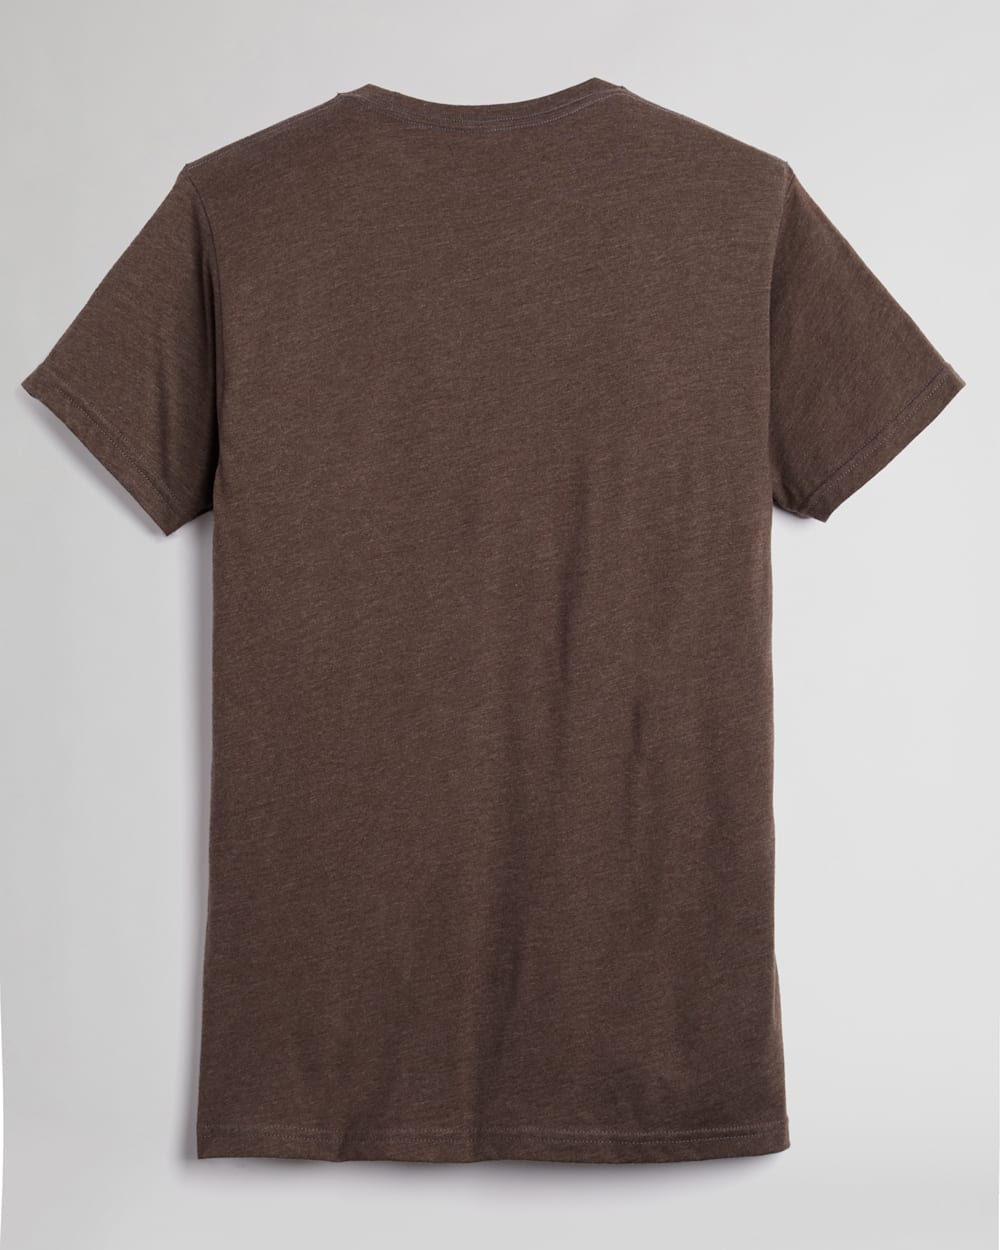 ALTERNATE VIEW OF MEN'S RODEO GRAPHIC TEE IN ESPRESSO/GOLD image number 2